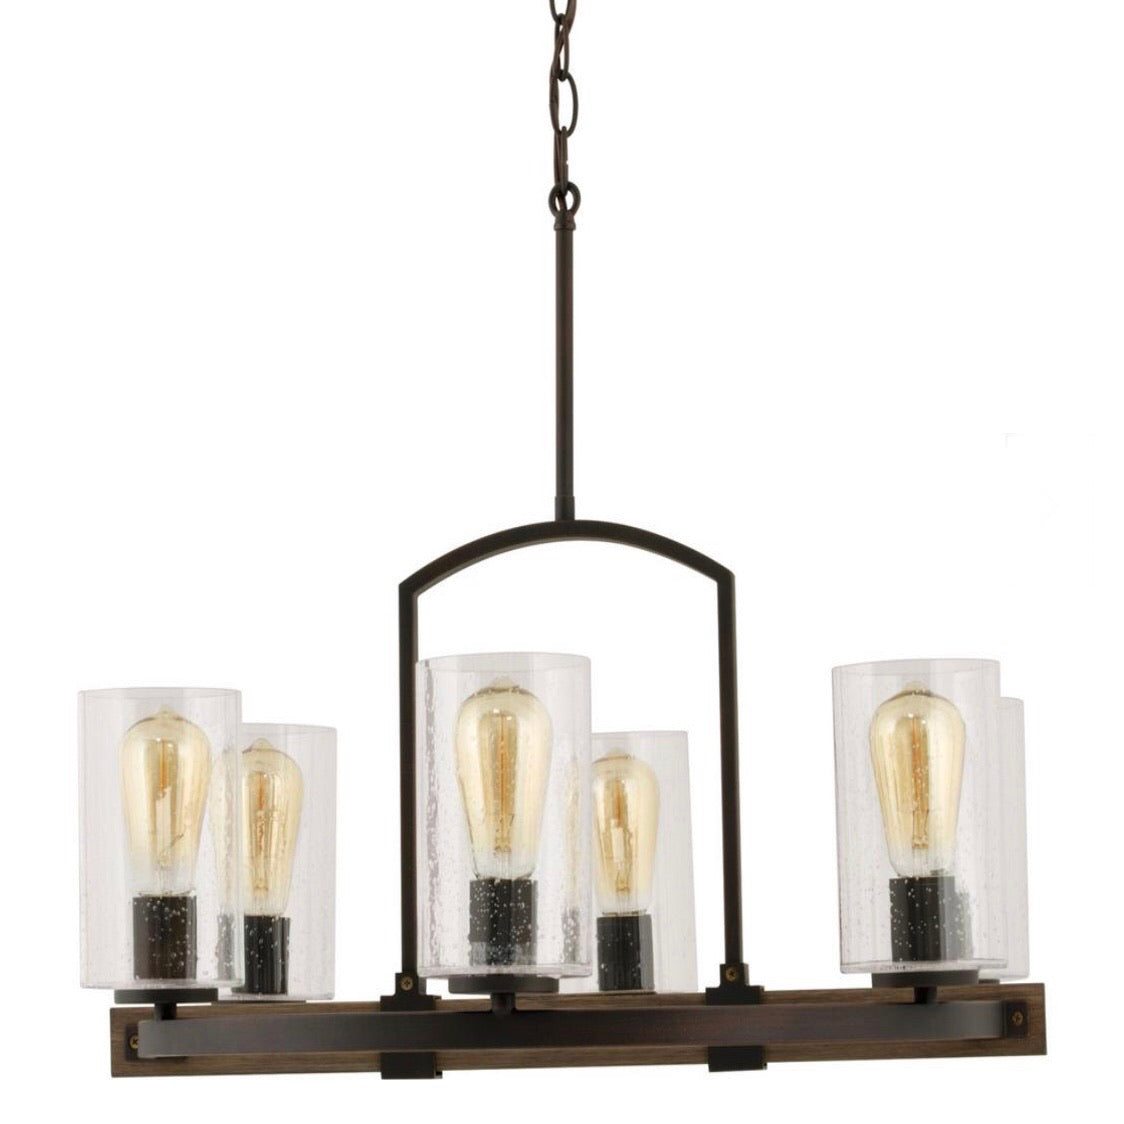 Newbury Manor Collection 25 in. 6-Light Vintage Bronze Chandelier with Clear Seeded Glass Shades by Home Decorators Collection